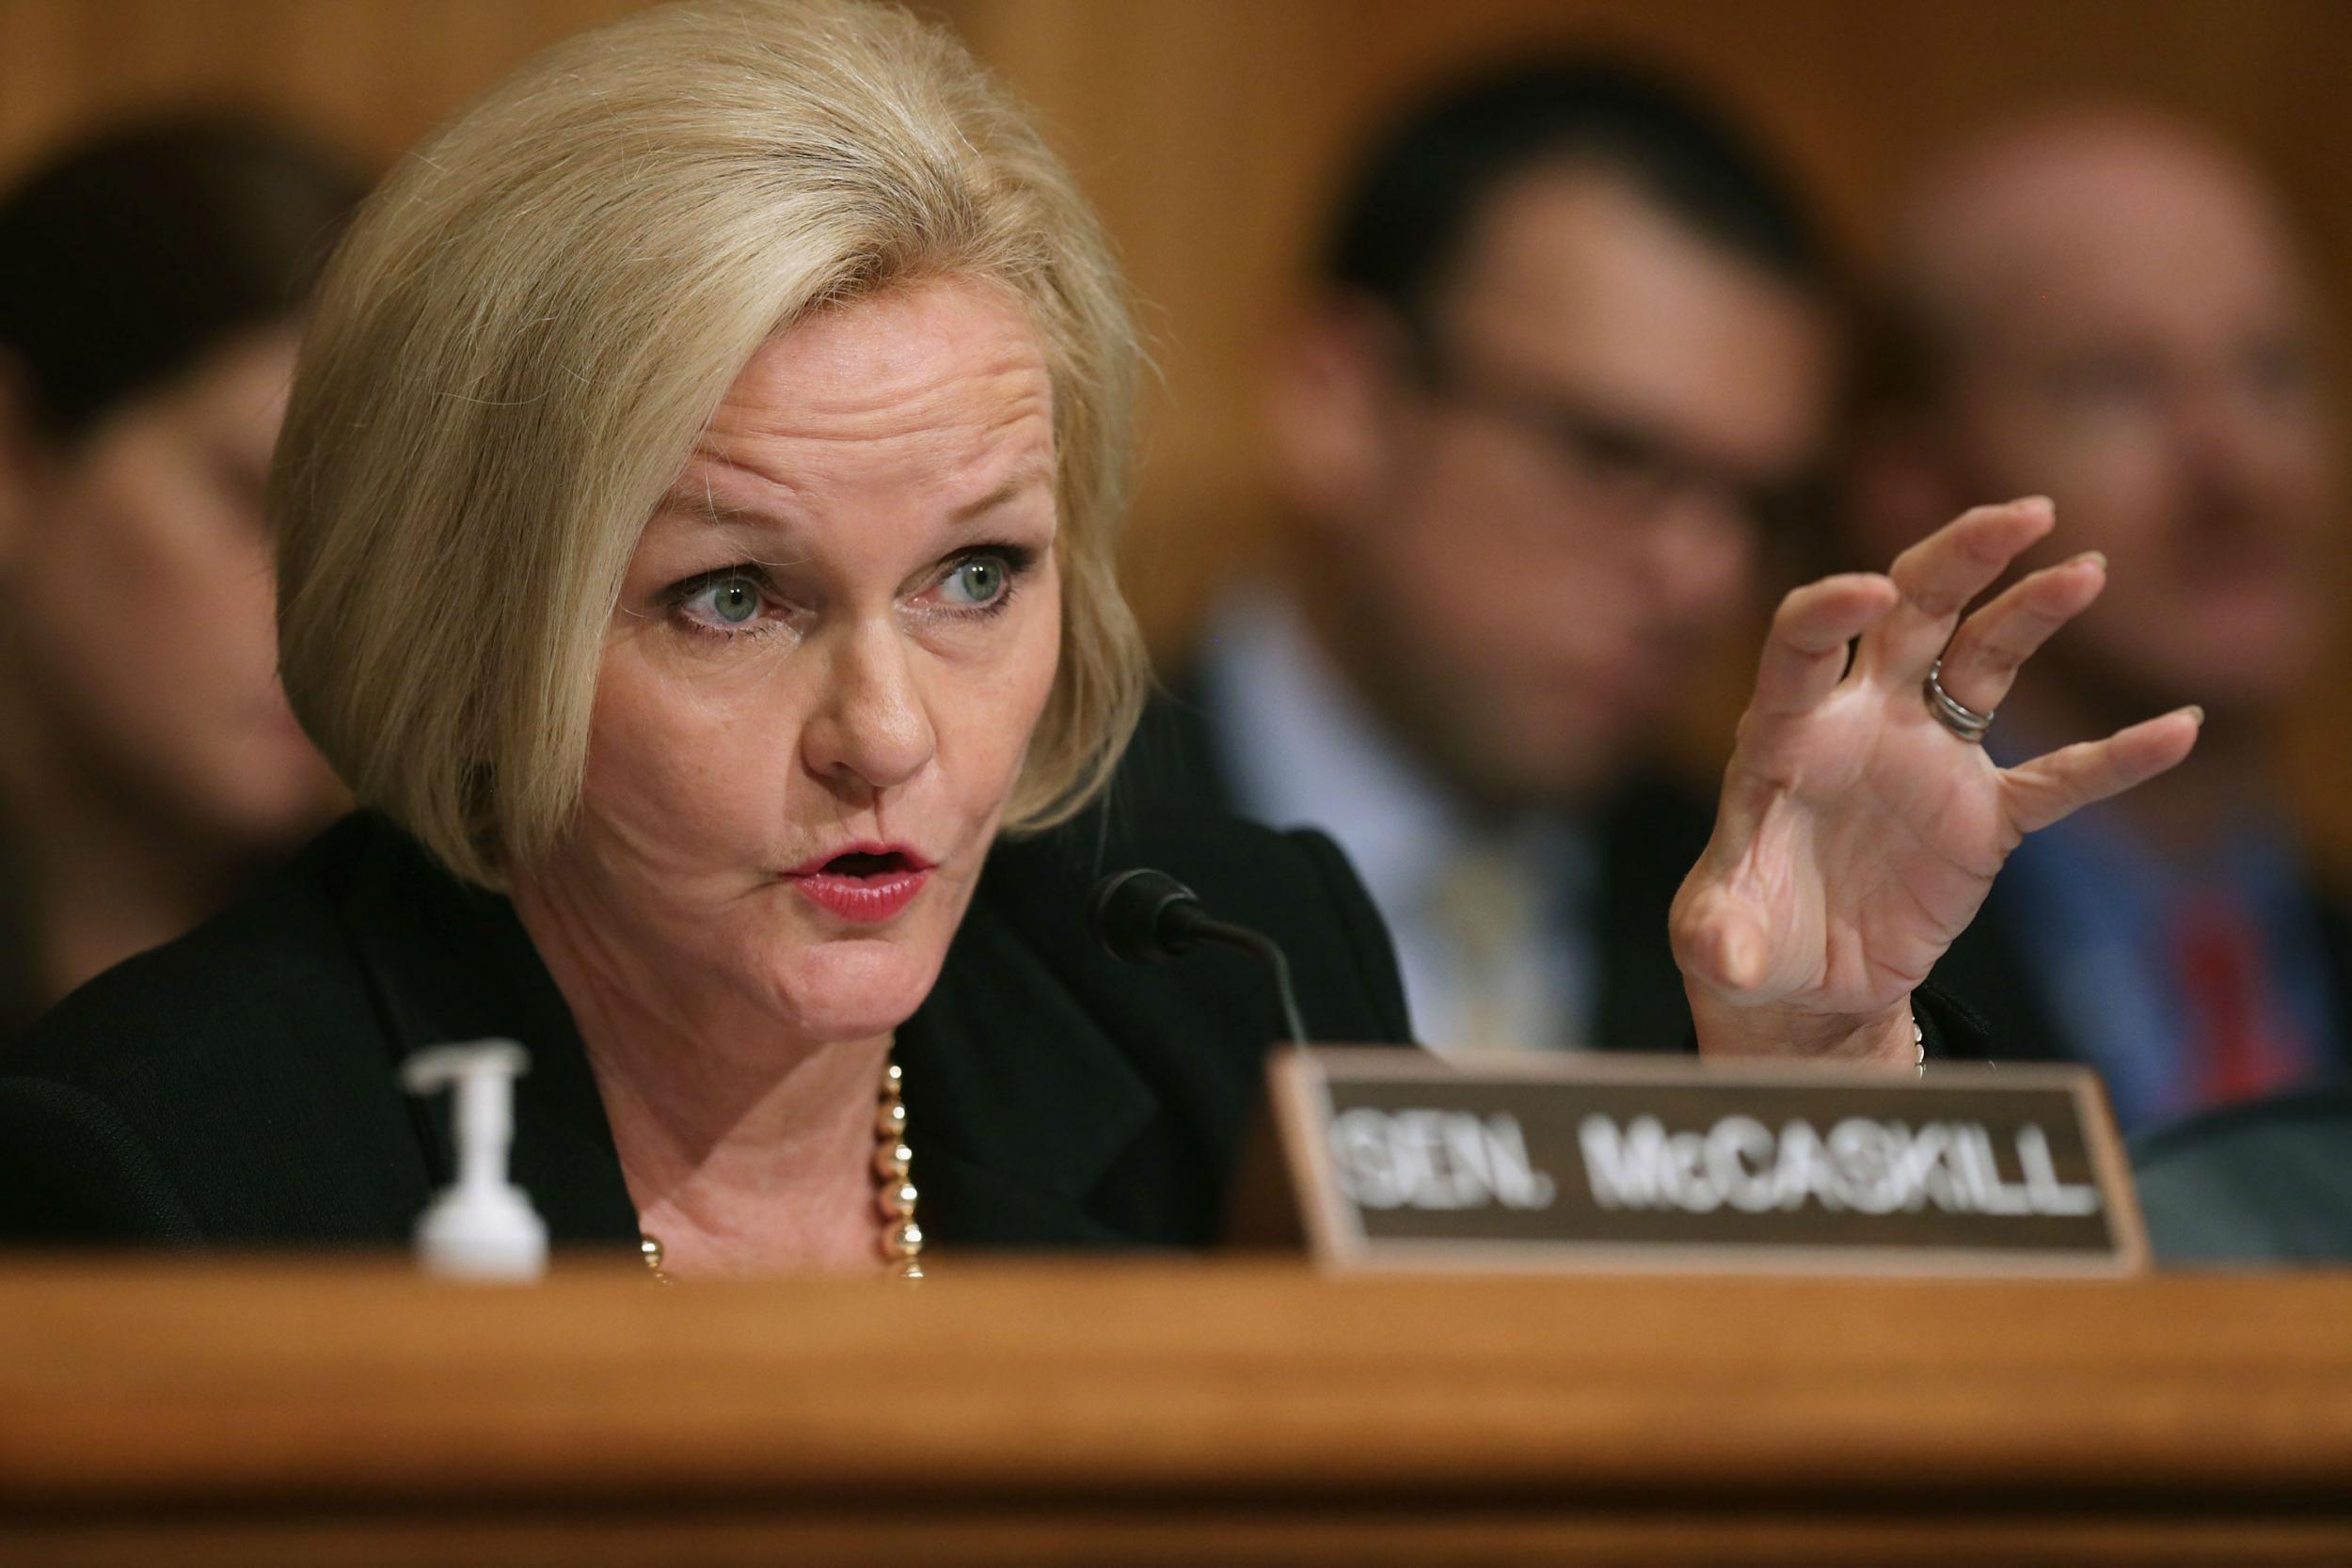 Senator McCaskill has fought for gay marriage, a minimum wage and gender equality